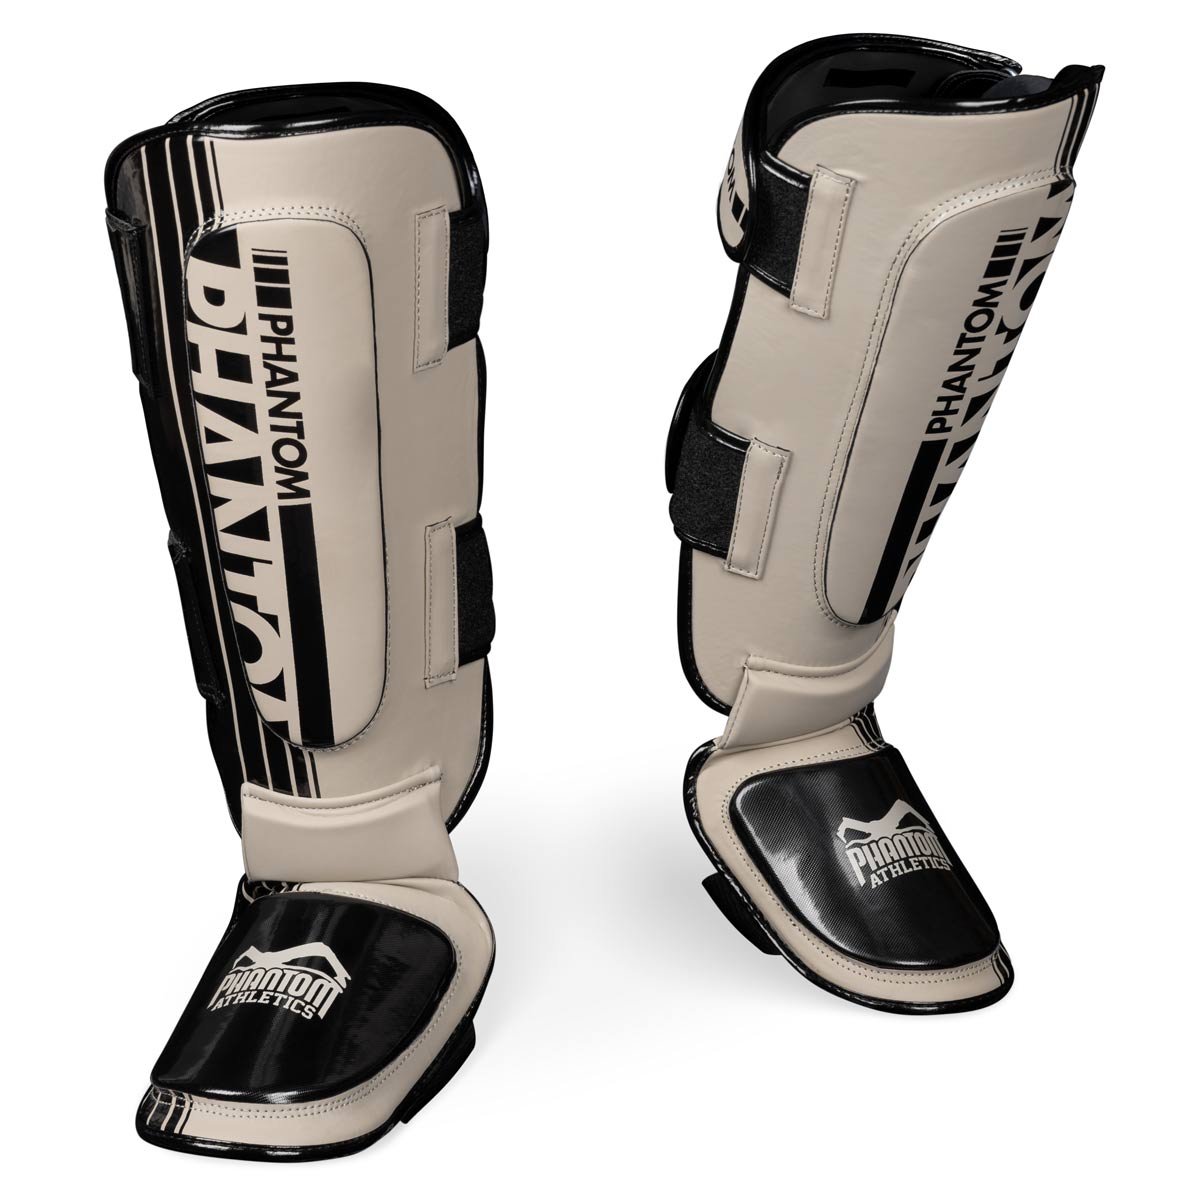 The Phantom Apex Hybrid shin guards for MMA and Muay Thai in the color sand.